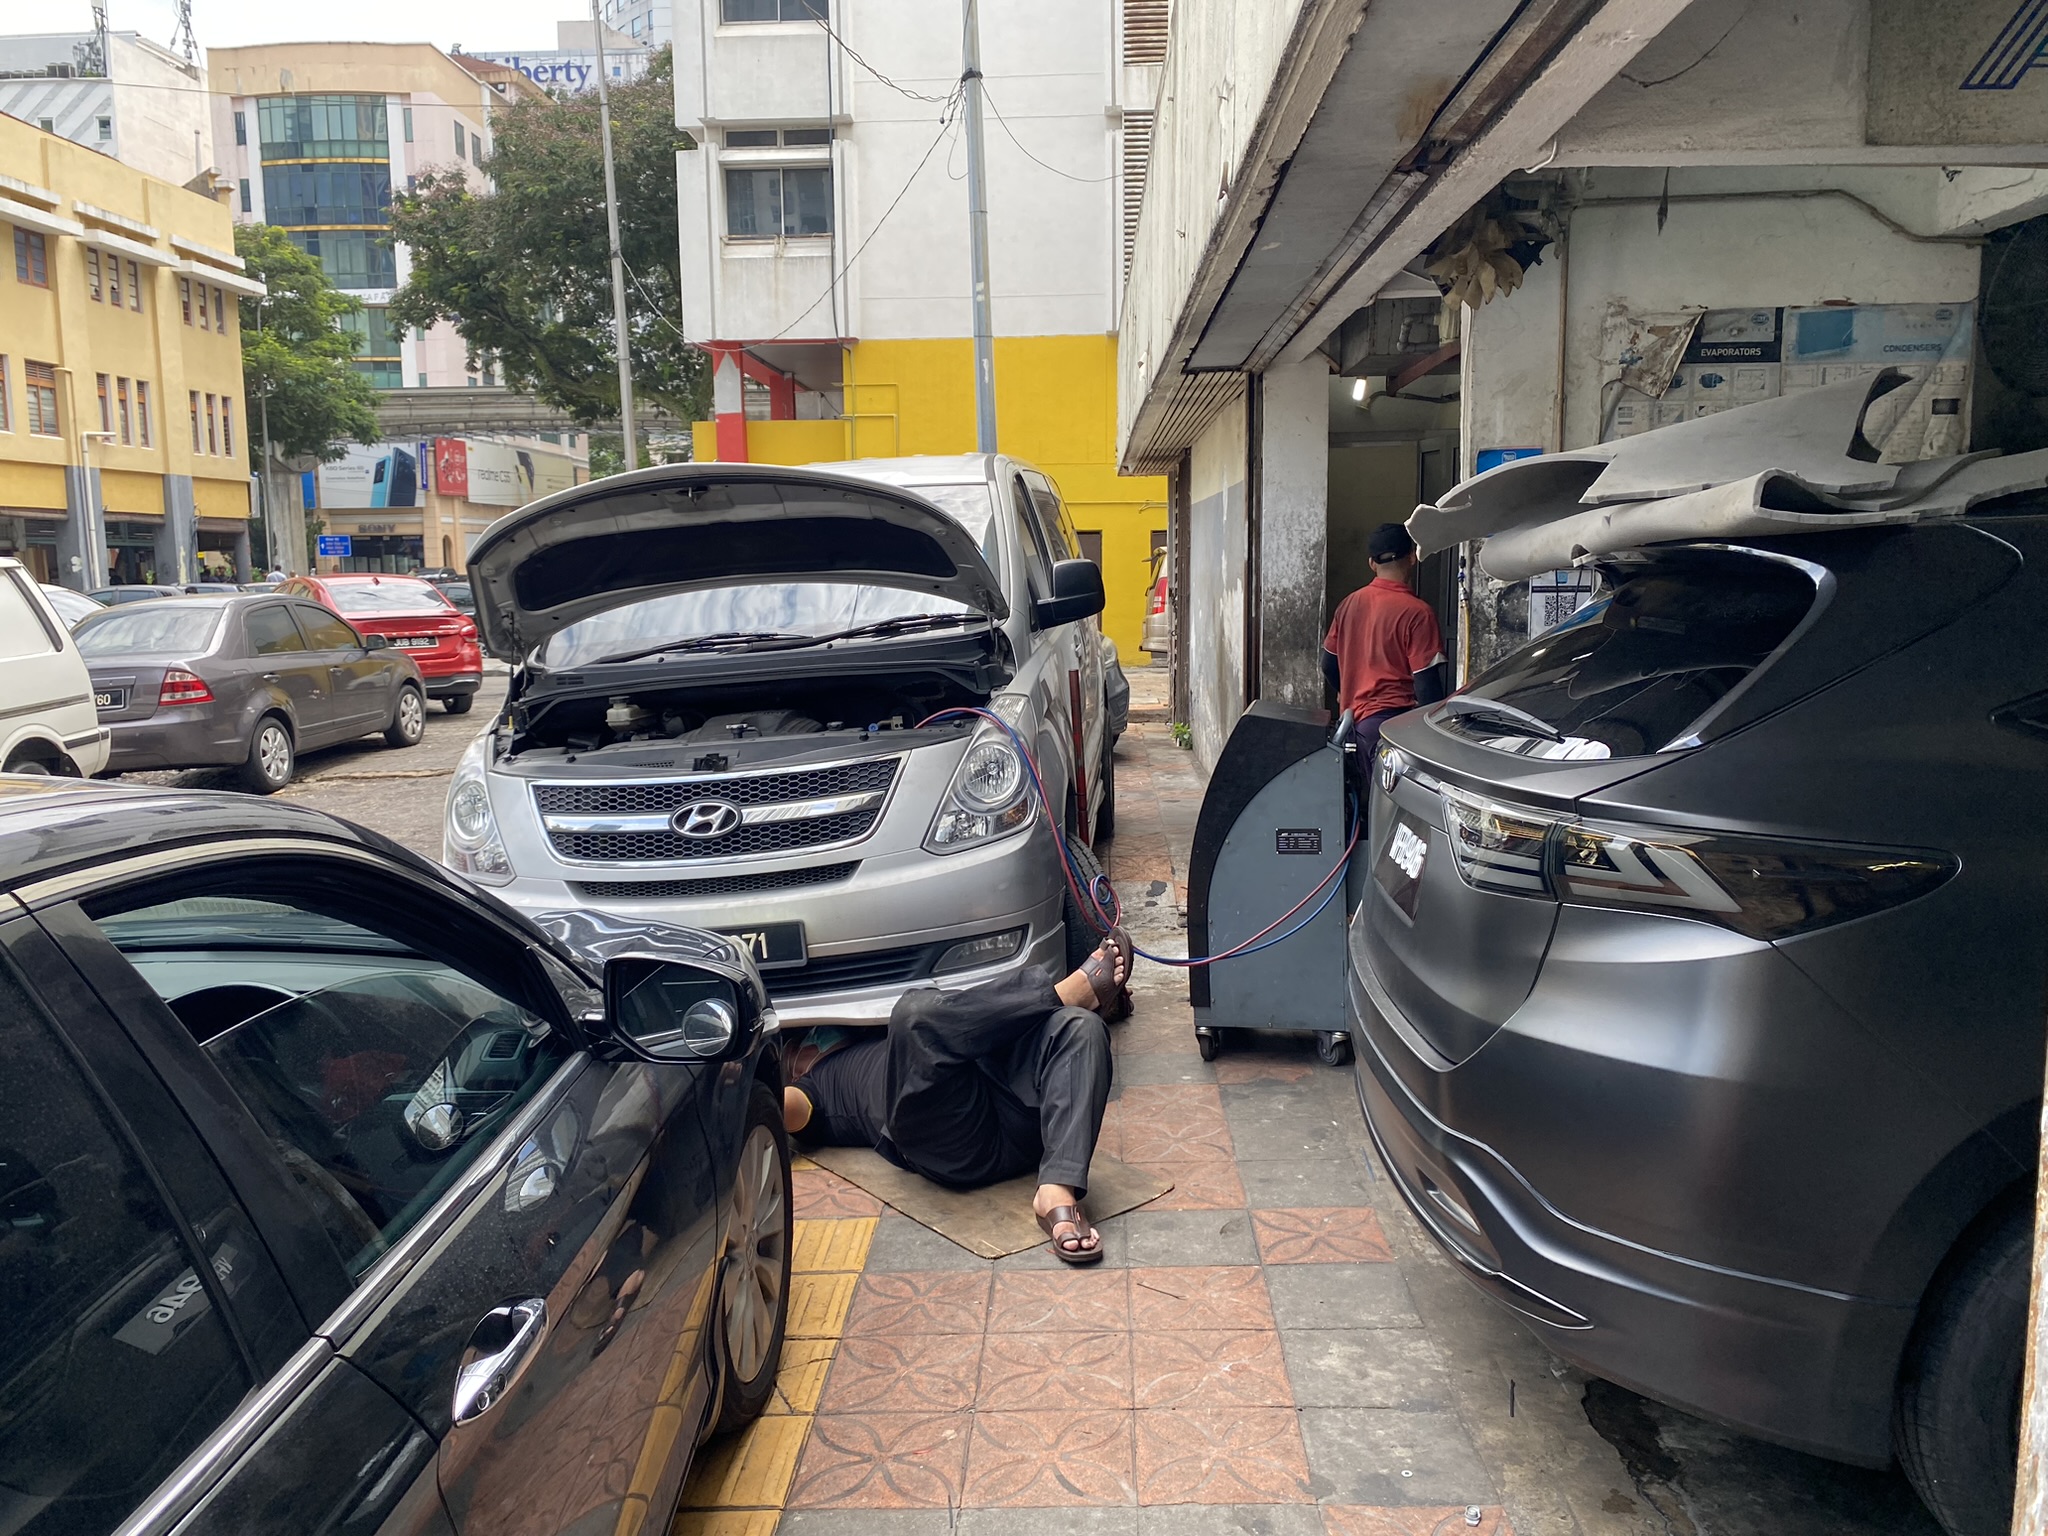 A mechanic repairing a car air conditioner at Ming Wah Car Cooler in Kuala Lumpur. Next to him is a refrigerant recovery machine, which helps mechanics cut costs and prevent emissions during servicing. Photo: Tilden Chao, 2023.